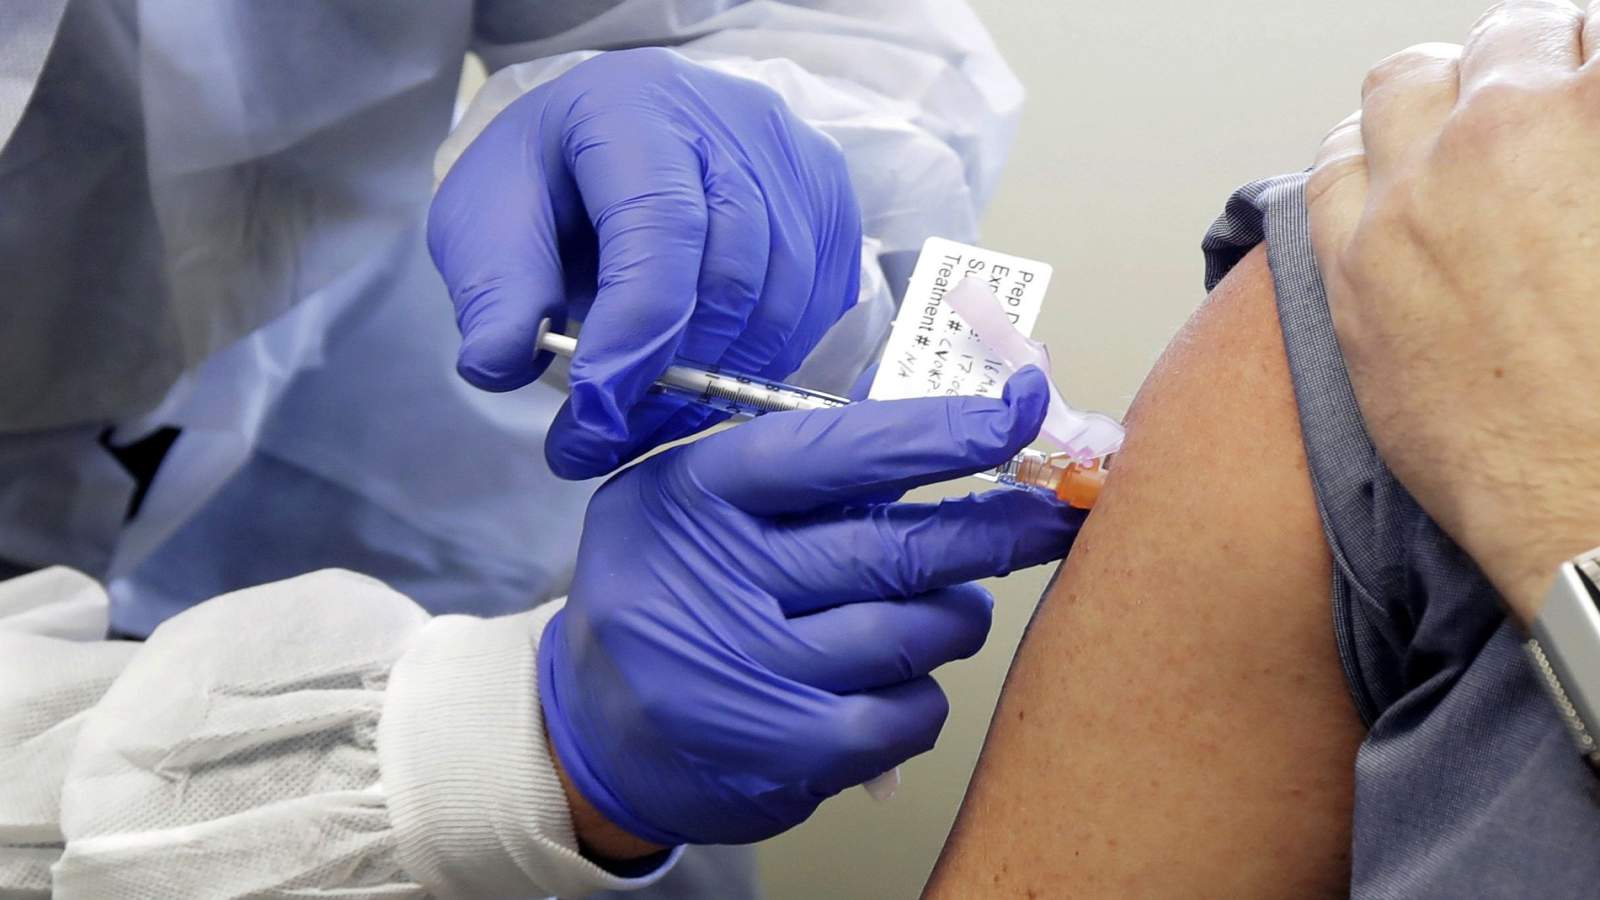 Flu vaccine doesn’t increase risk for COVID-19, study finds